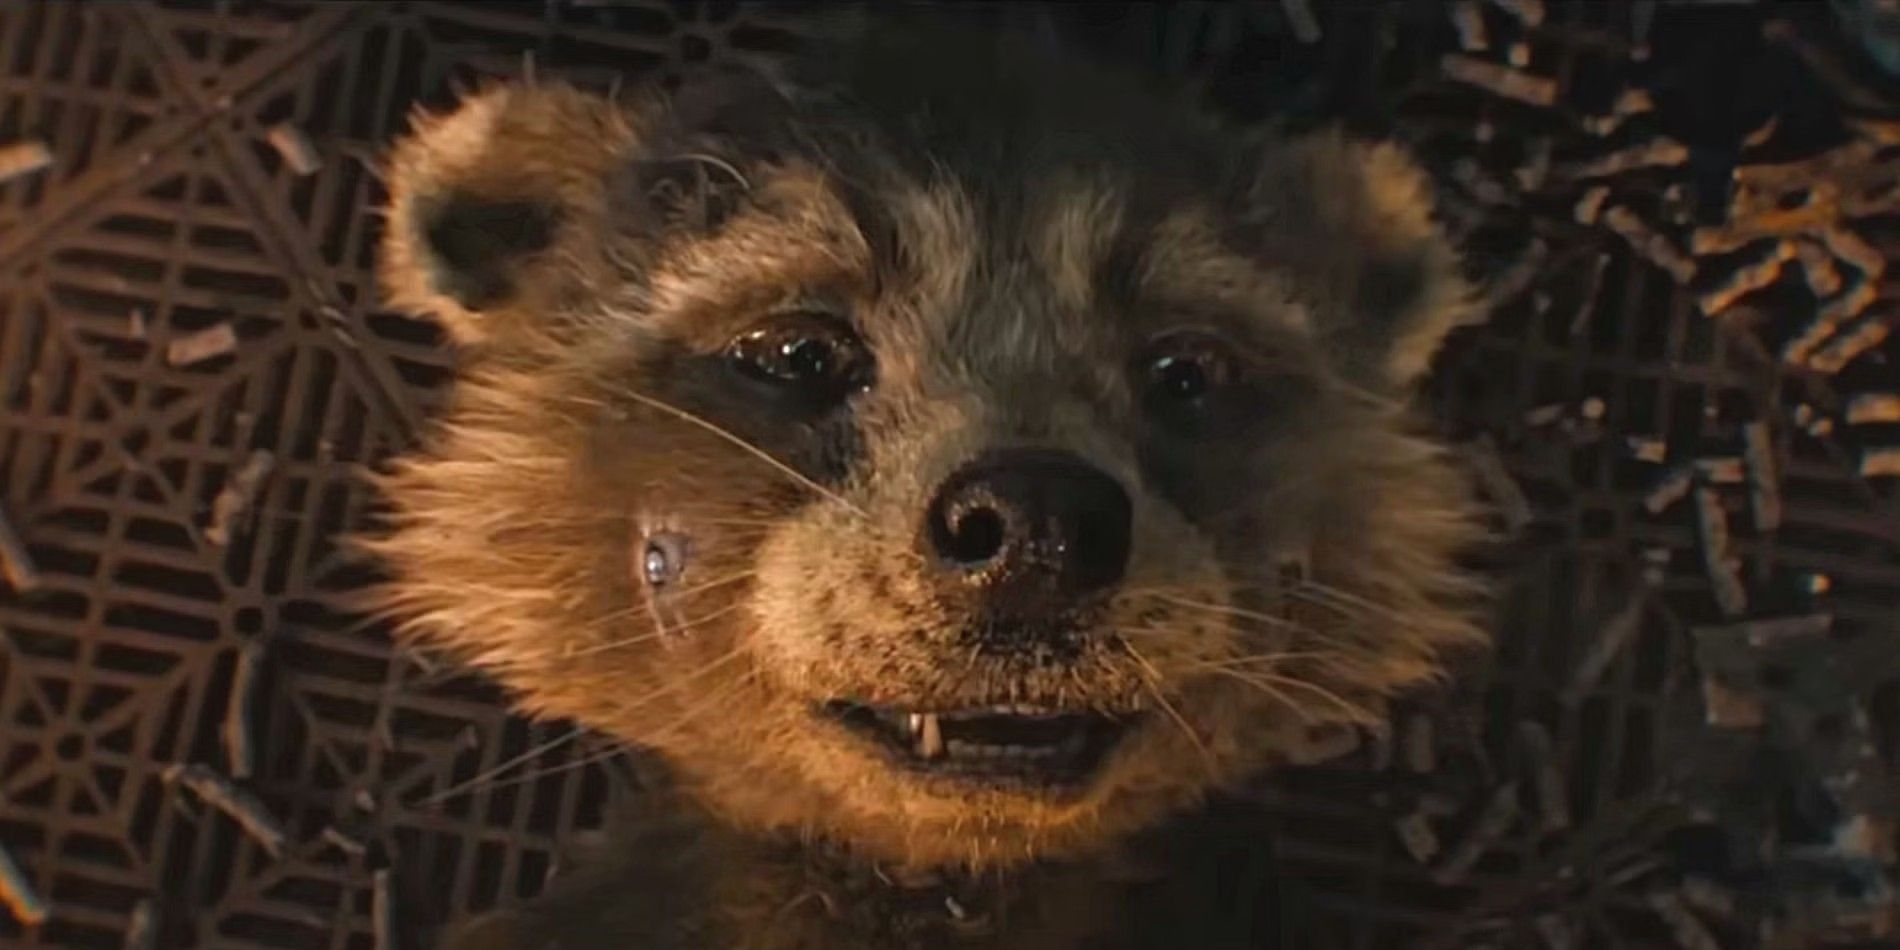 Rocket Raccoon's near death experience in Guardians of the Galaxy Vol. 3